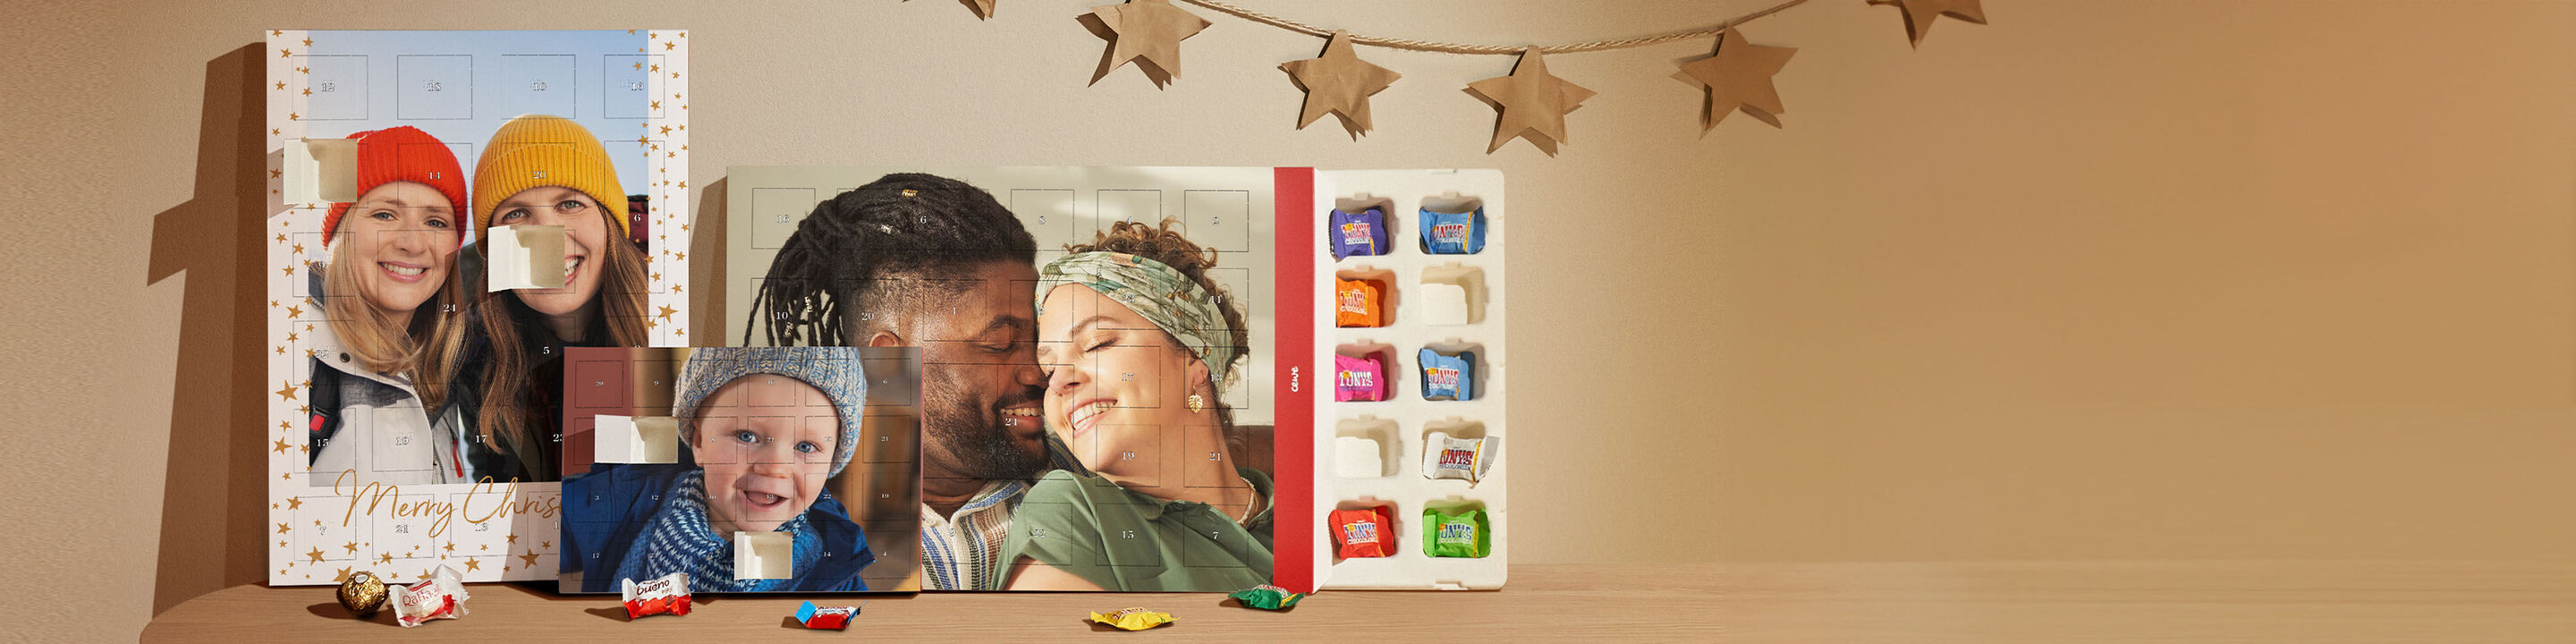 Personalised advent calendar with kinder and Ferrero chocolate